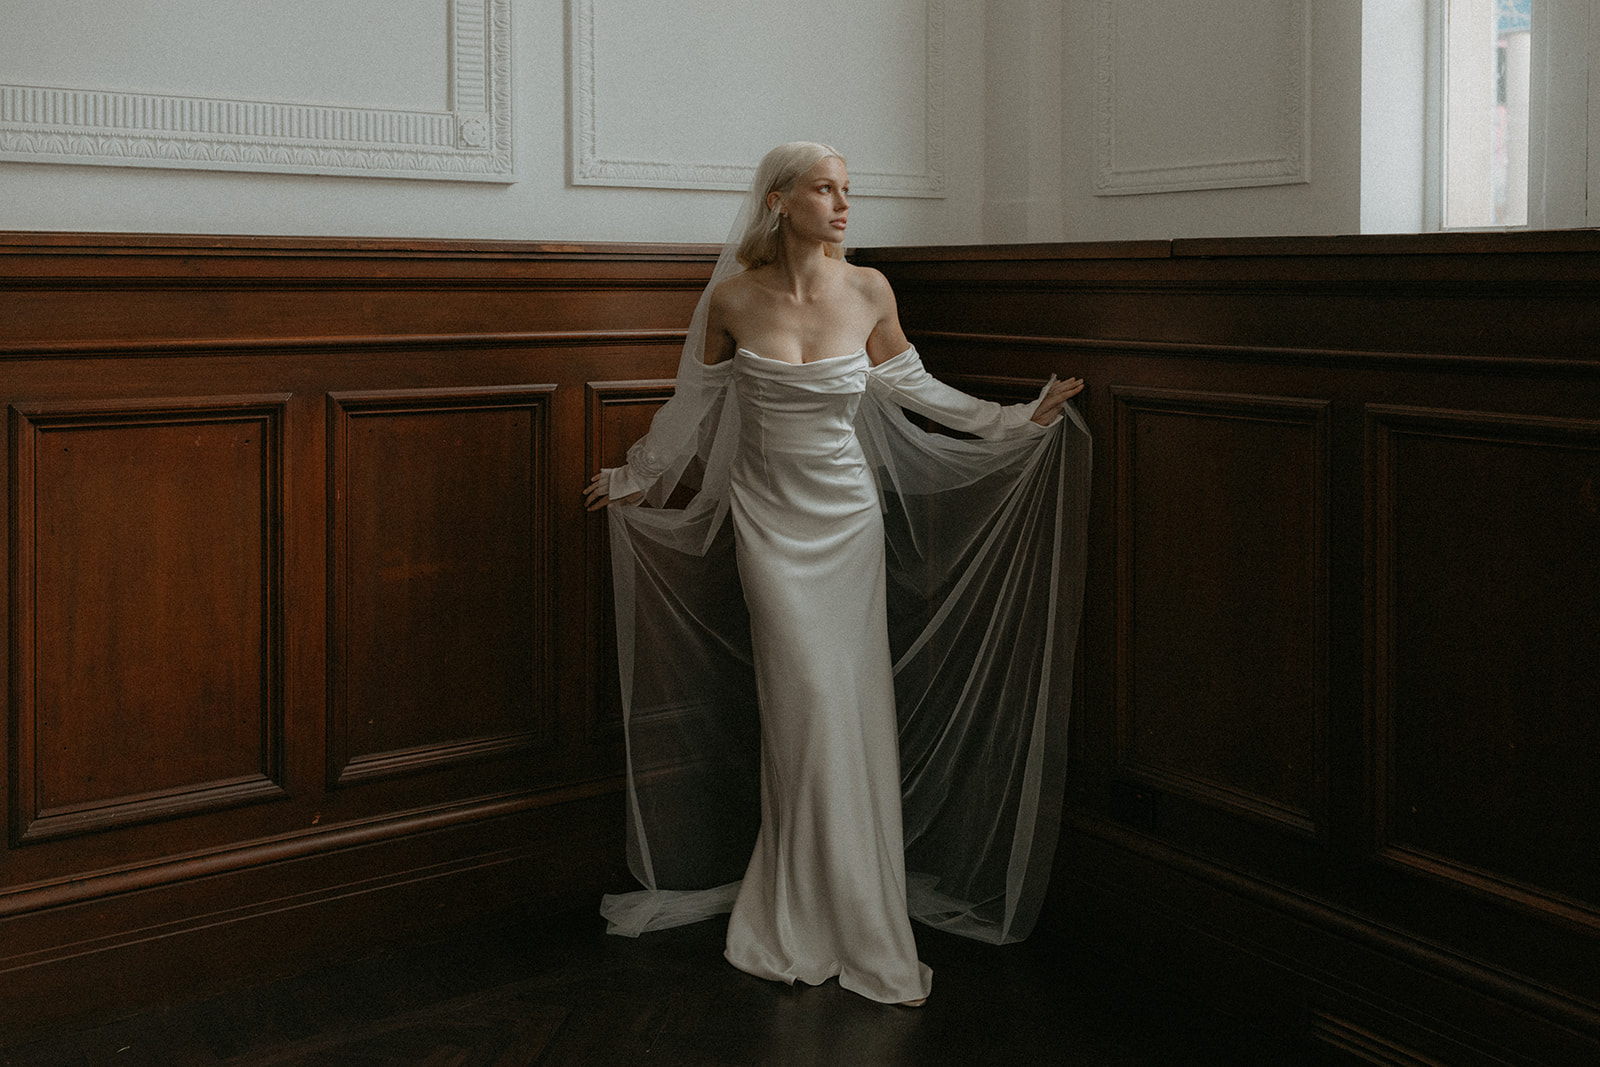 Artistic model looking elegantly in her sheering gown in a historic venue